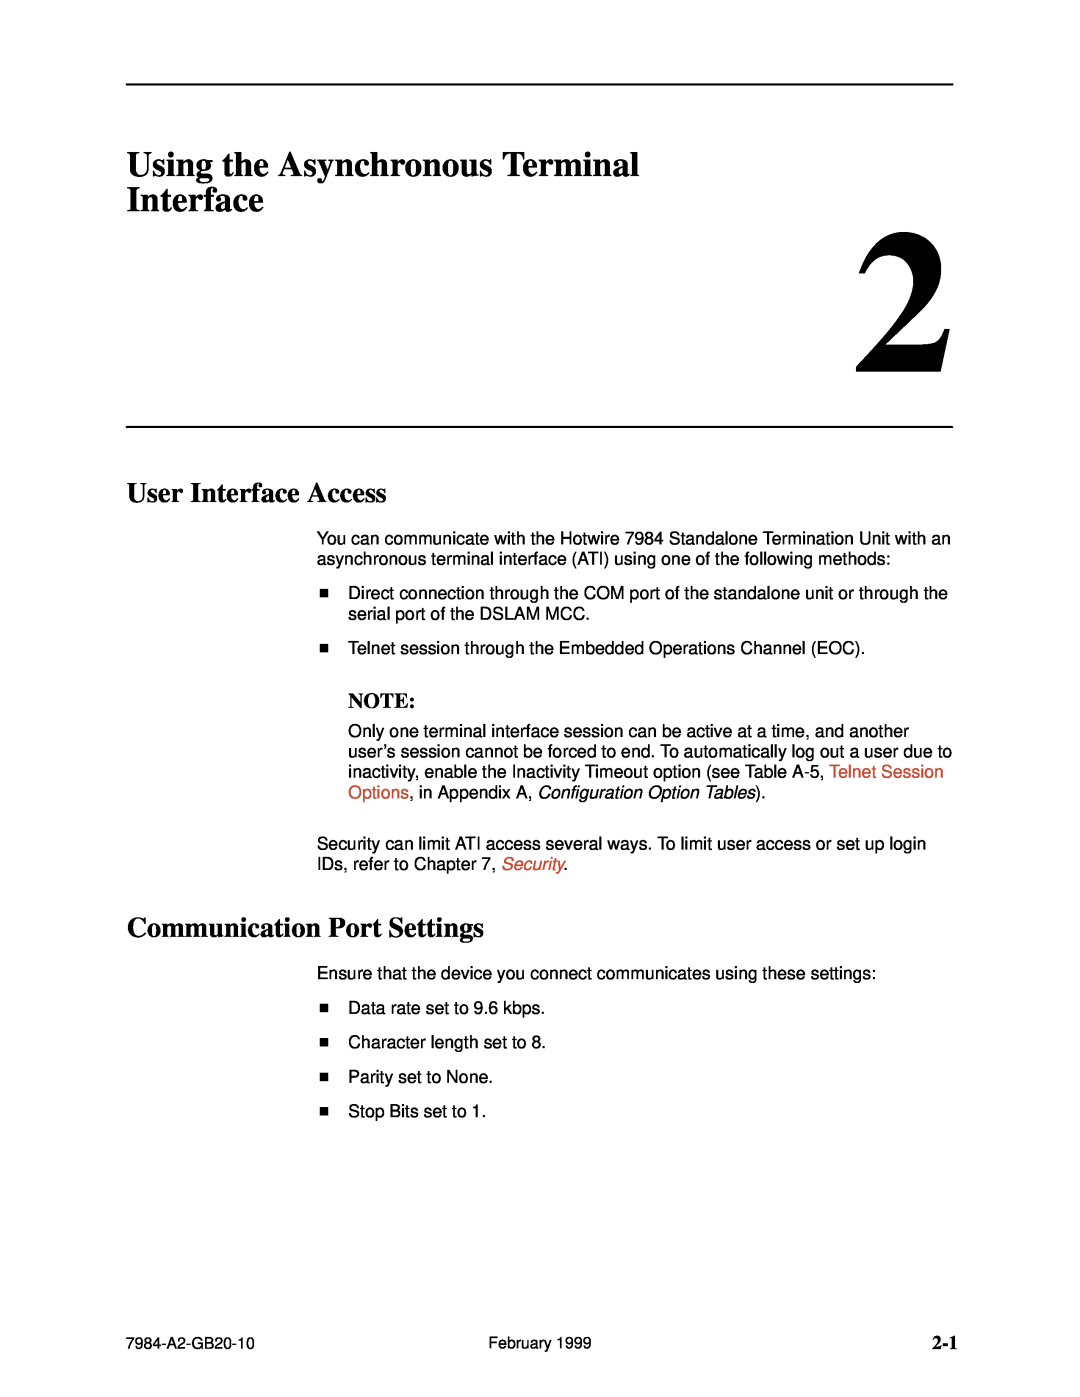 Paradyne Hotwire 7984 manual Using the Asynchronous Terminal Interface, User Interface Access, Communication Port Settings 